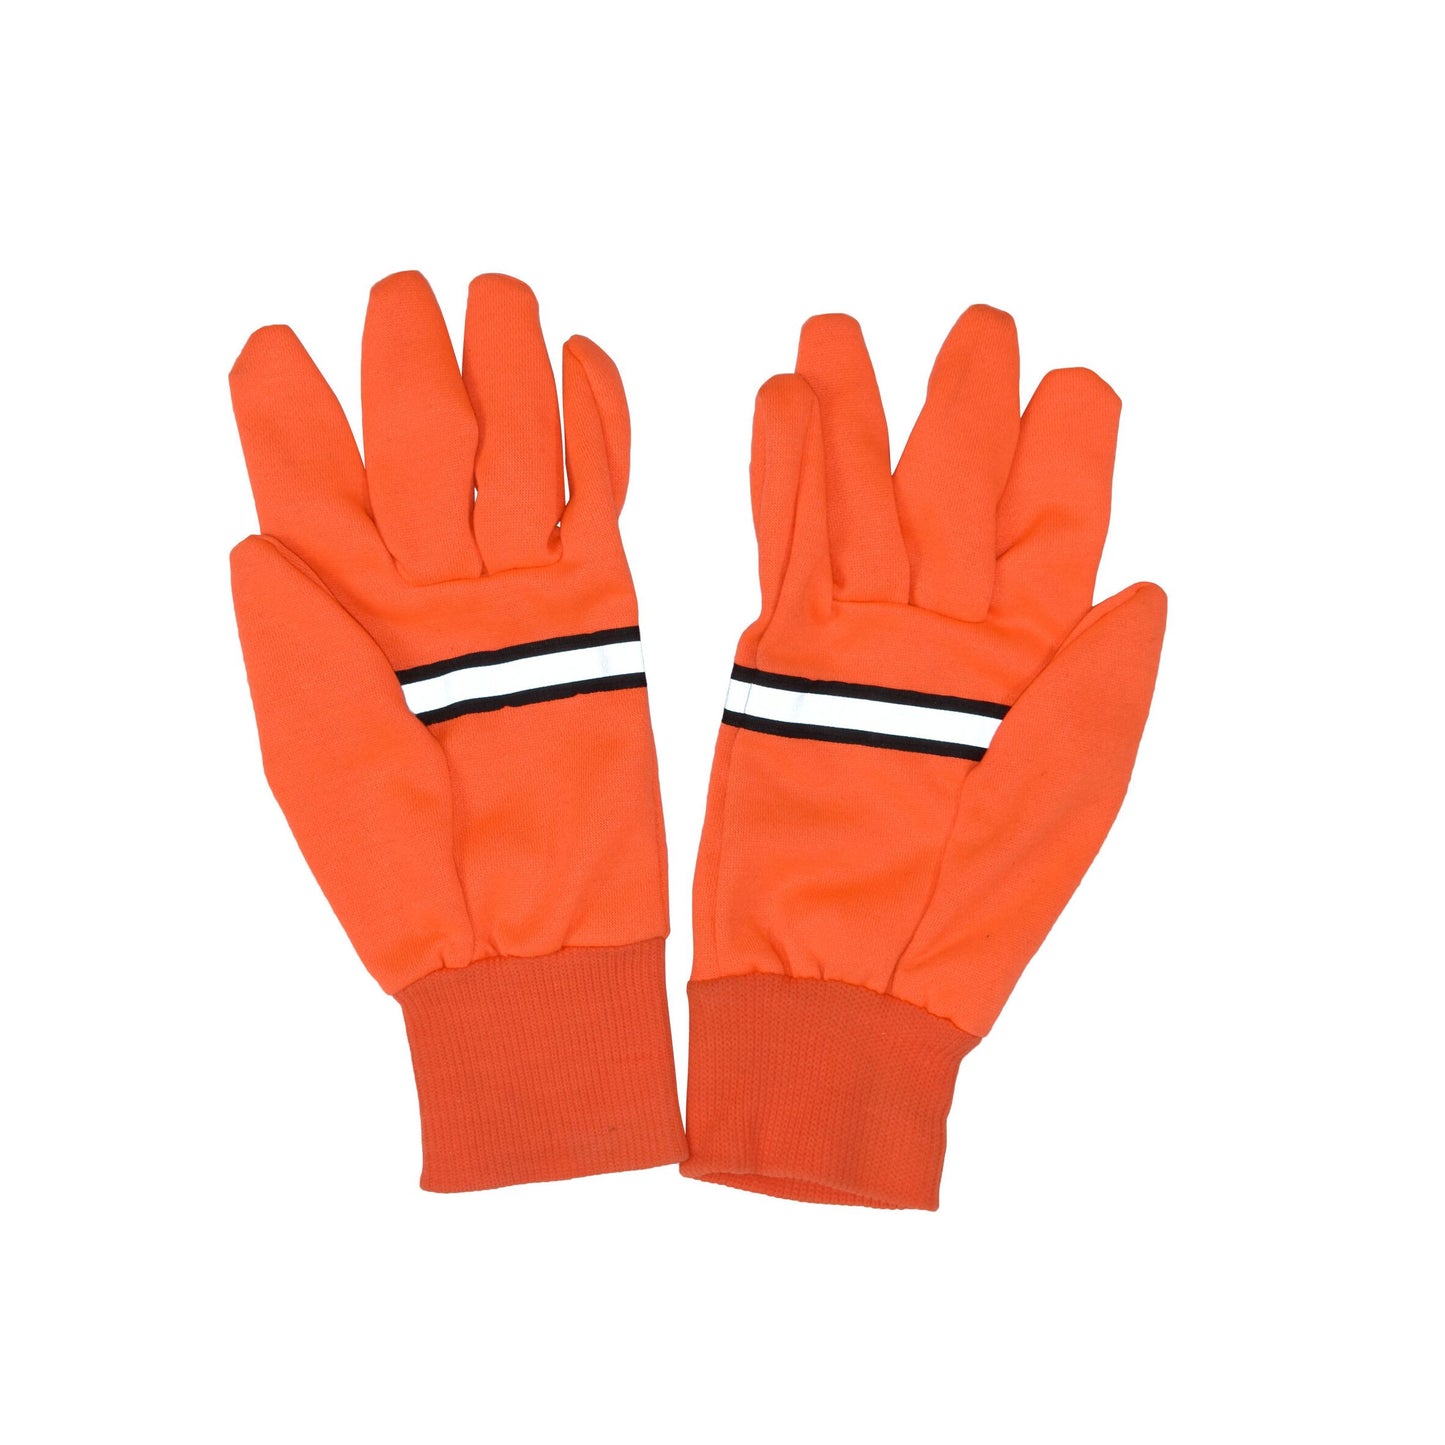 High Visibility Traffic Gloves